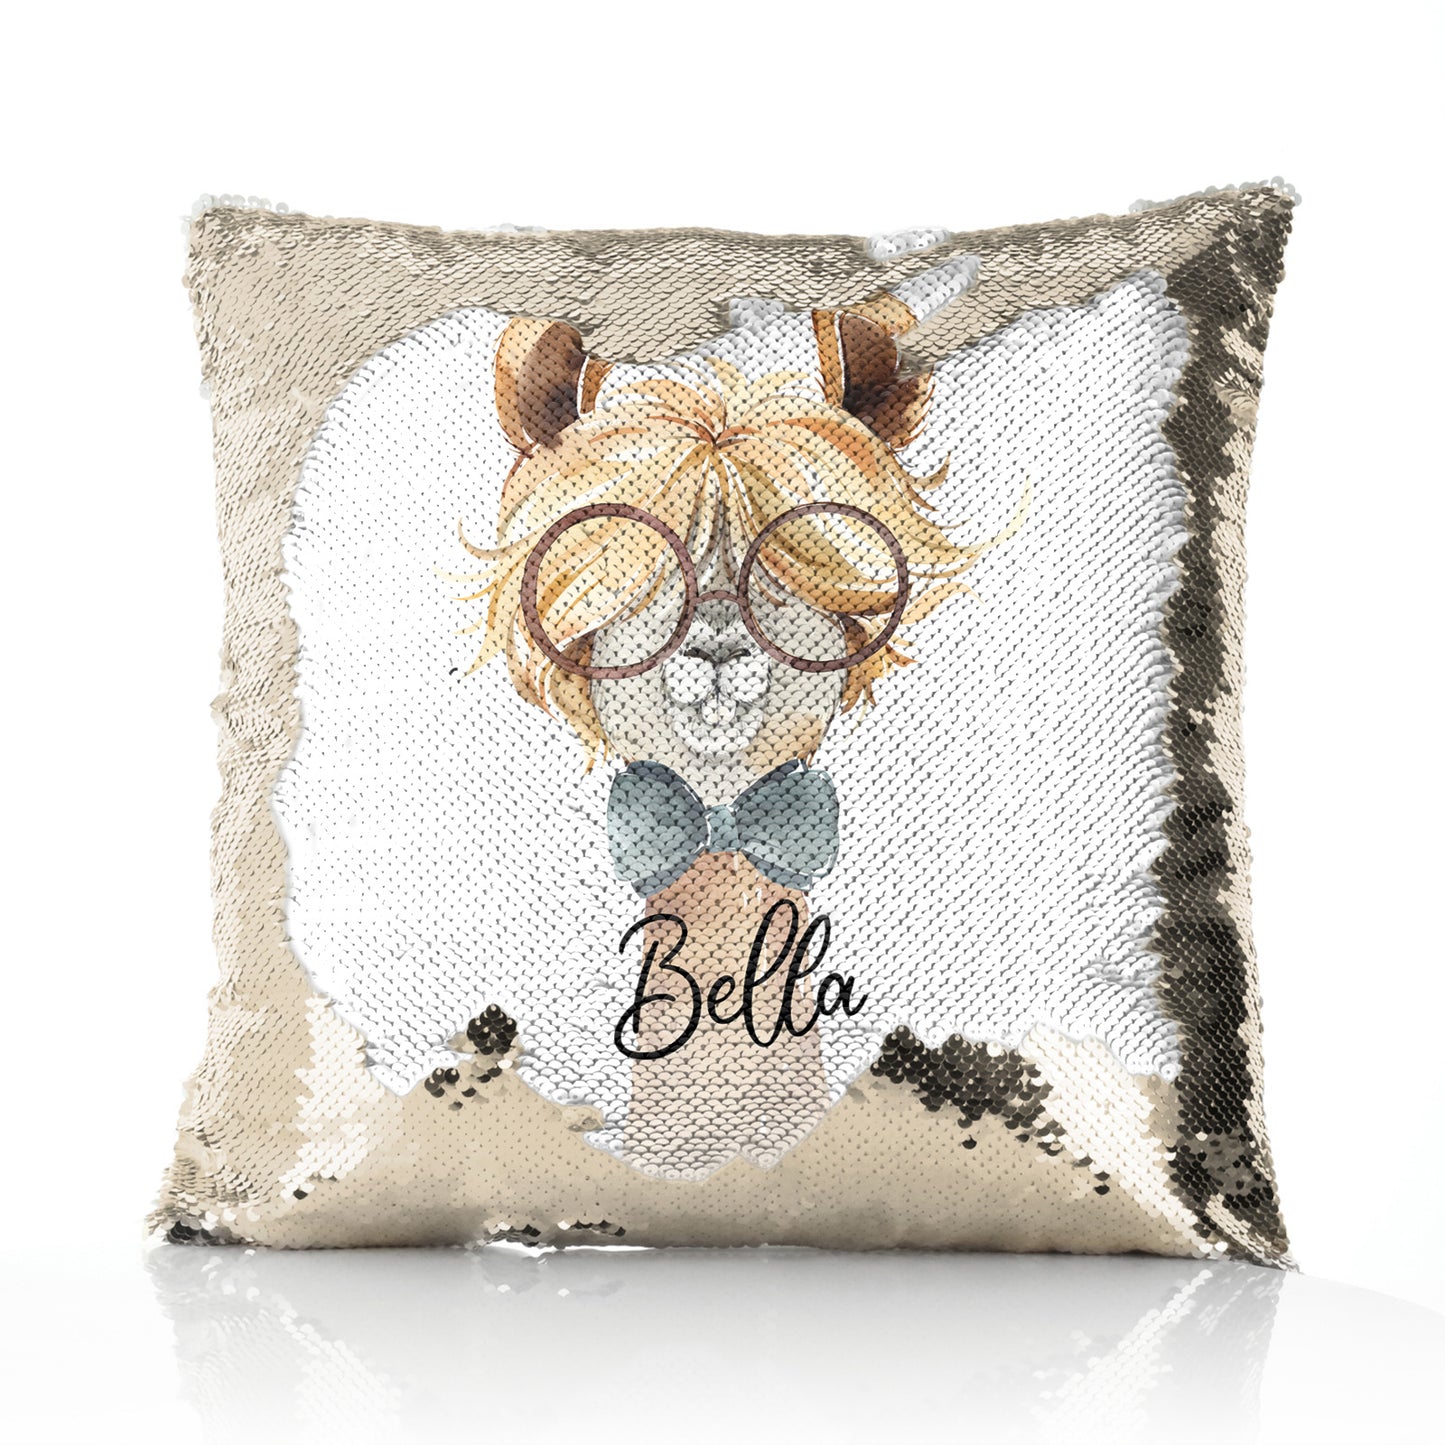 Personalised Sequin Cushion with Alpaca Bow Tie and Glasses and Cute Text